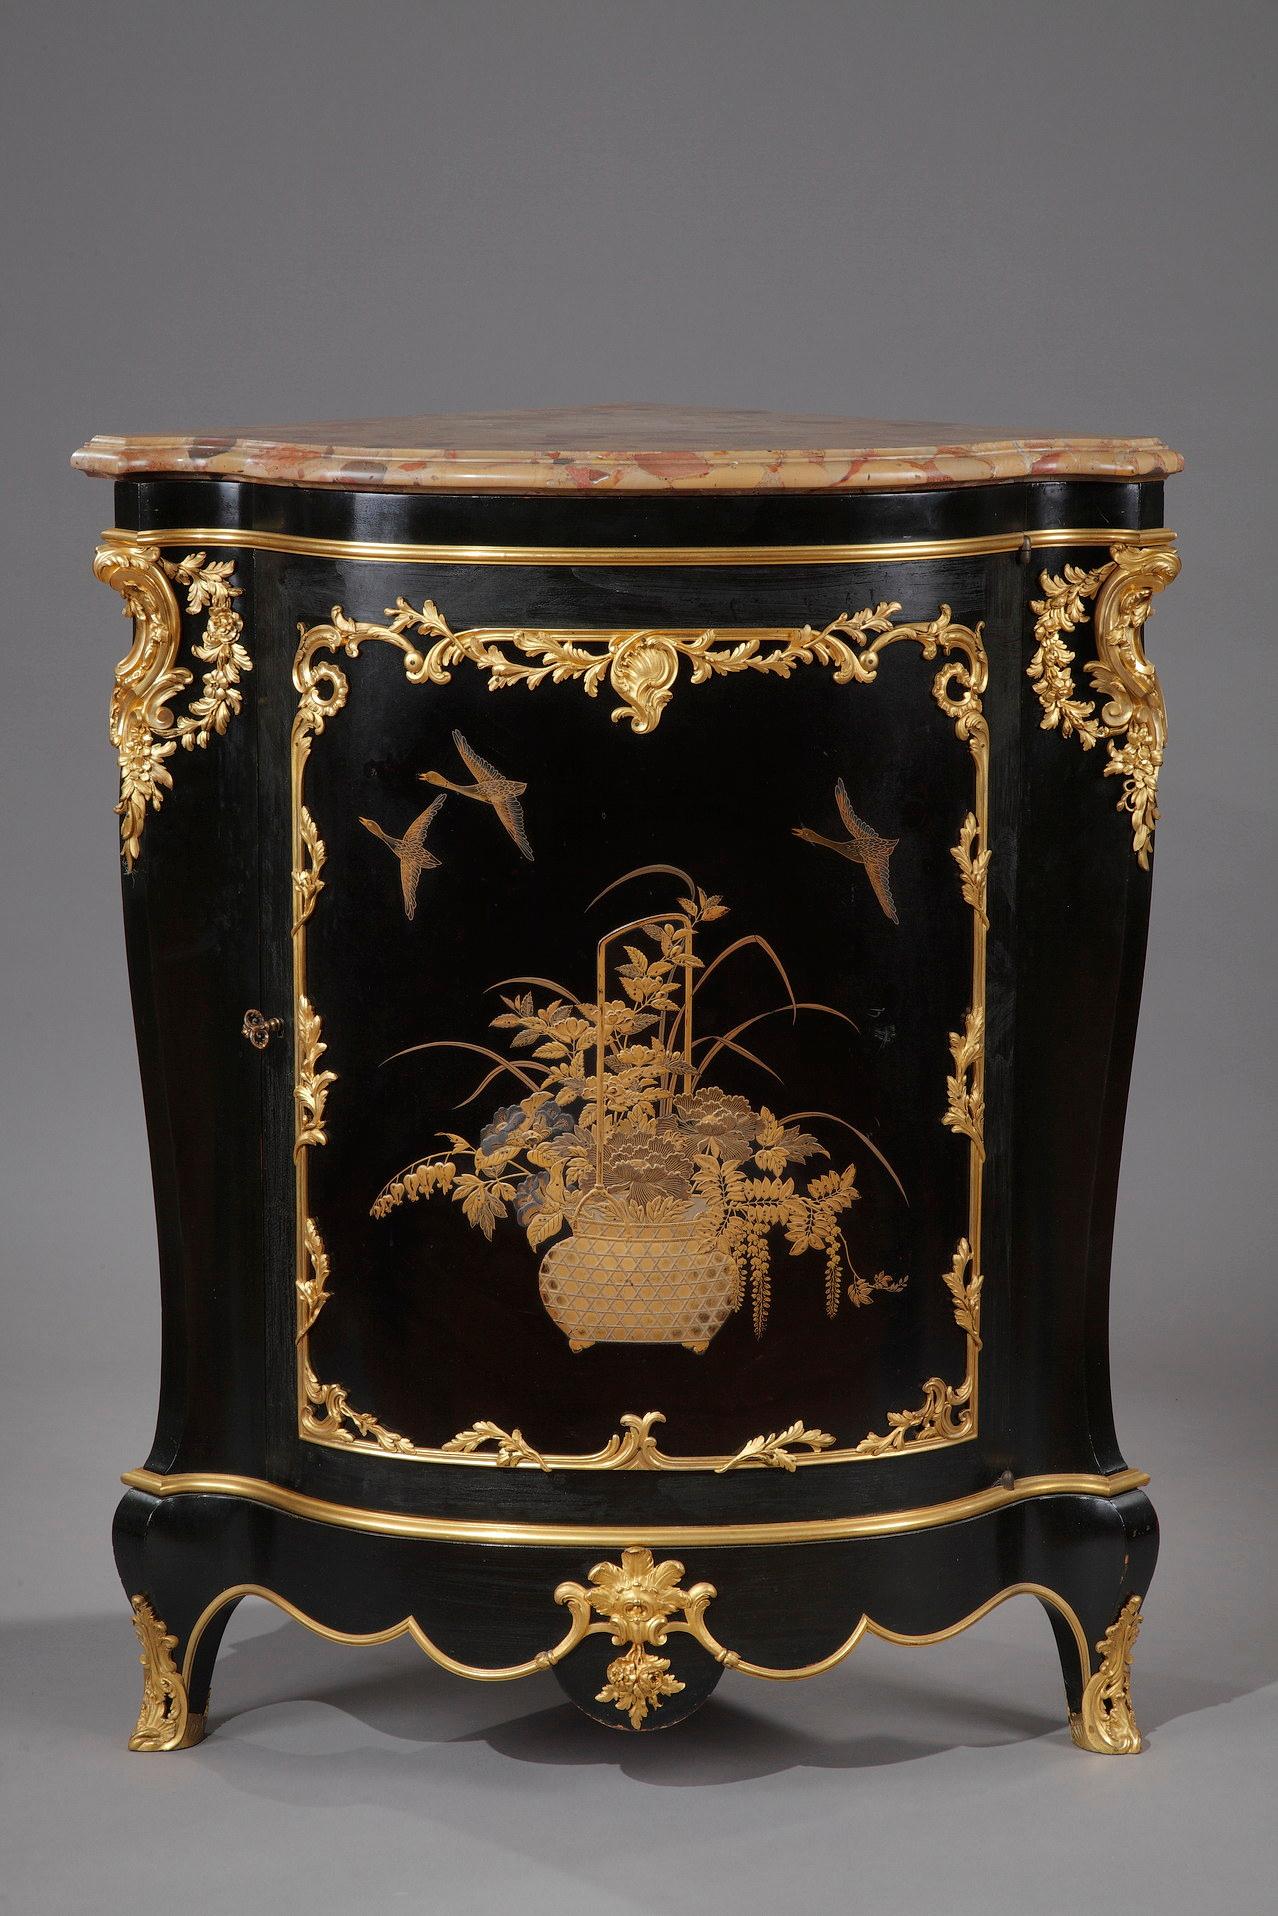 Stamped twice A BEURDELEY A PARIS on the back.

Charming Louis XV-inspired pair of encoignures in lacquer and gilded bronze. The animated facade opens to a door adorned with a panel with gilded decoration in the taste of Japan, painted on a black